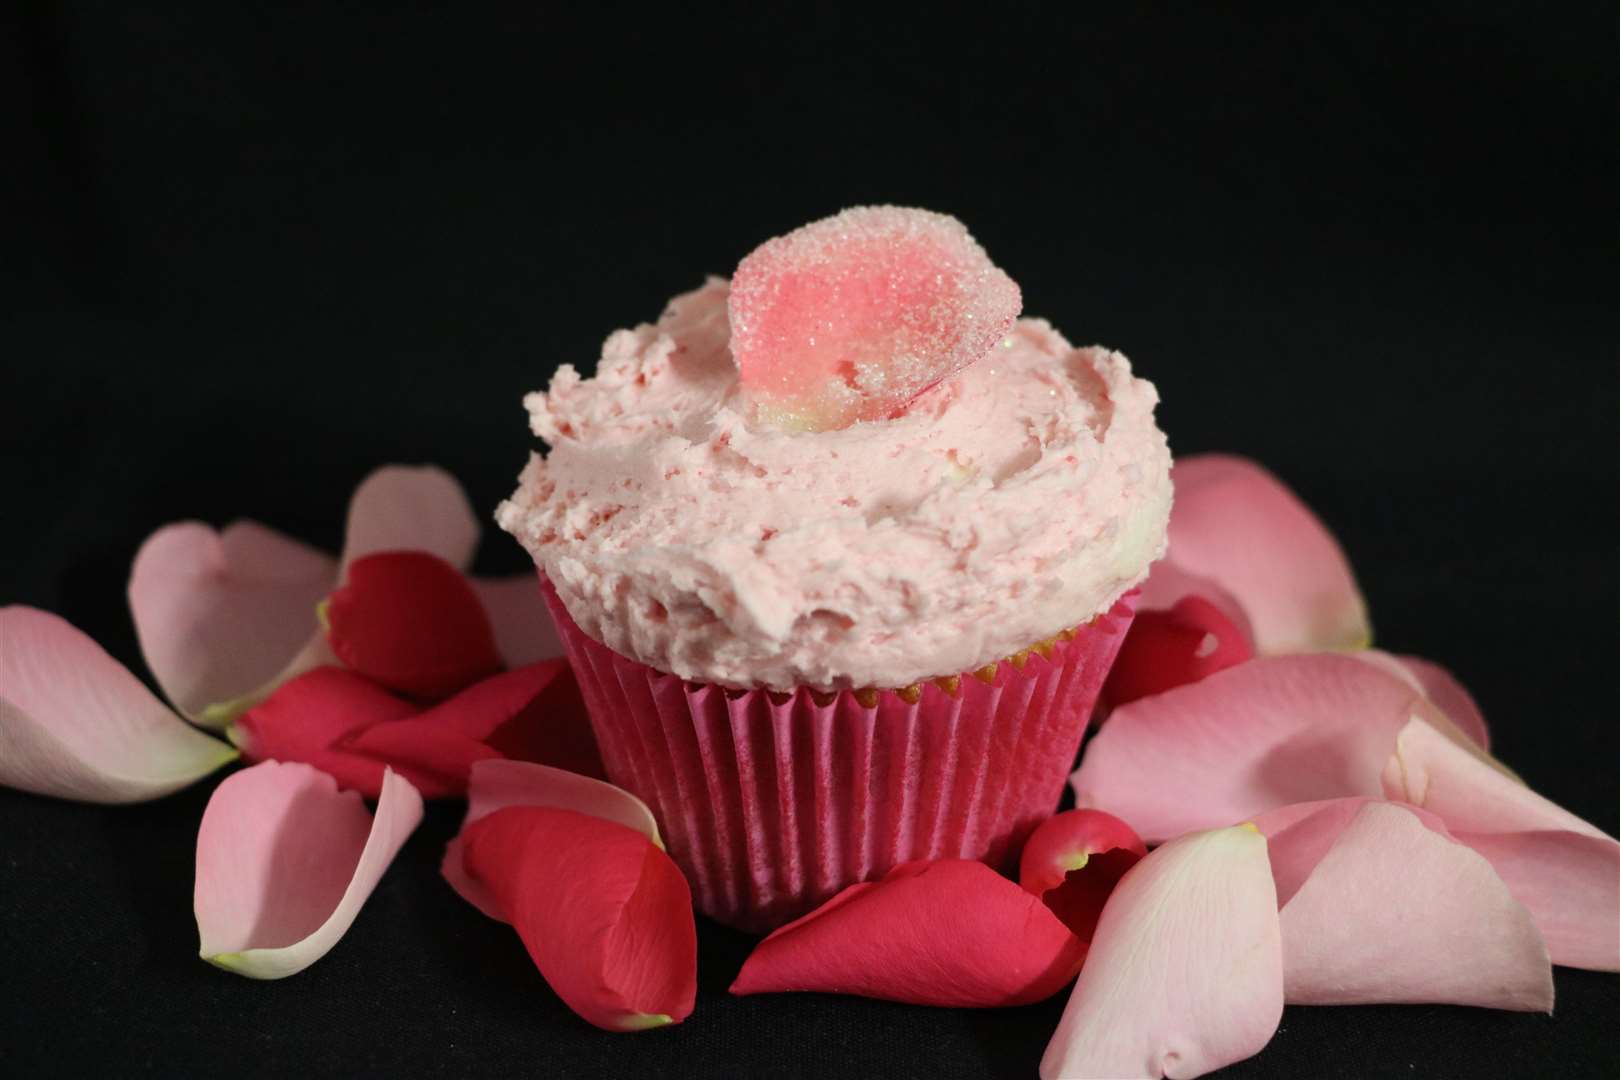 Cupcakes with rose petals (9485593)